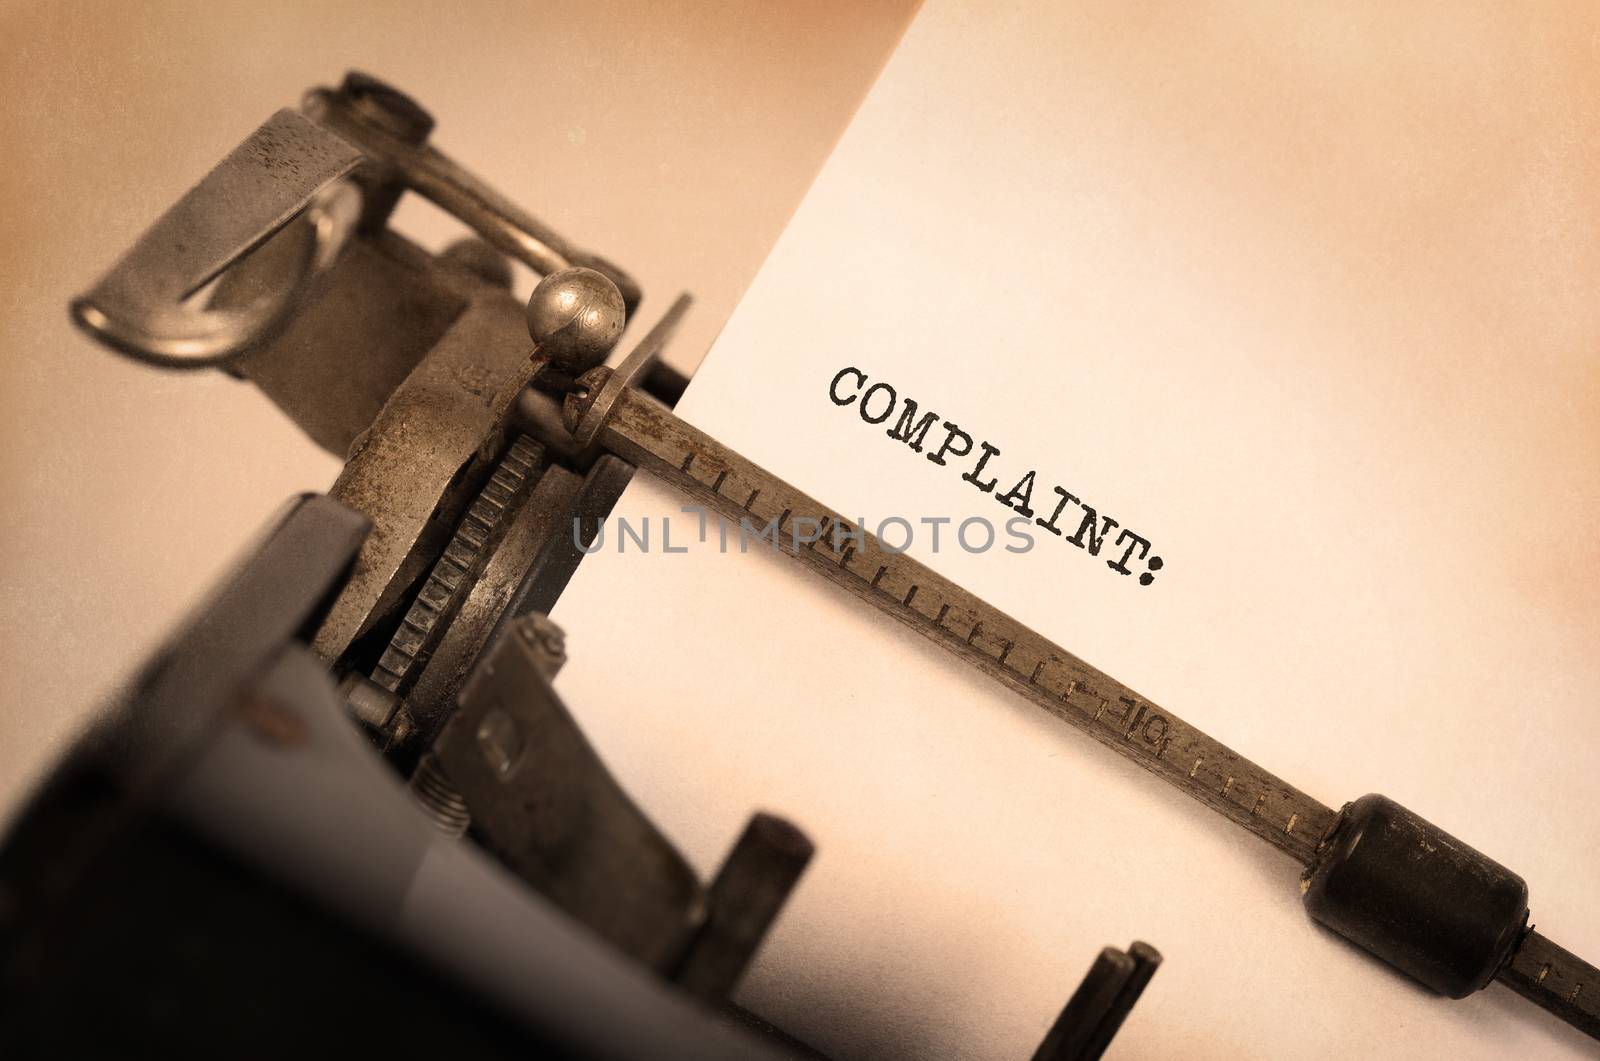 Vintage inscription made by old typewriter, Complaint